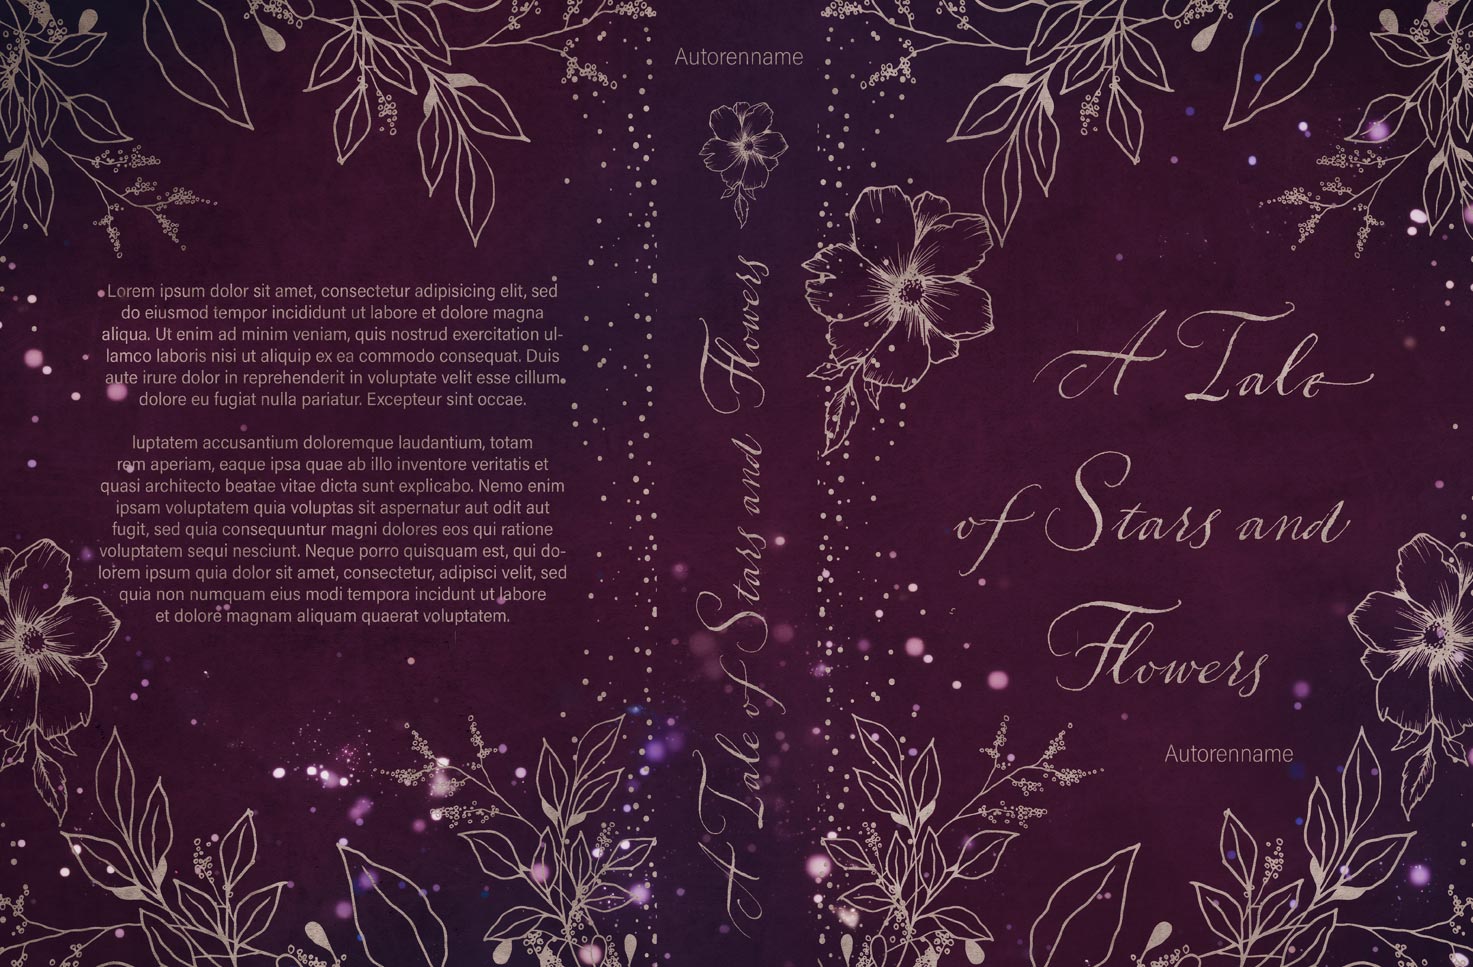 A Dream of Stars and Flowers Premade Cover